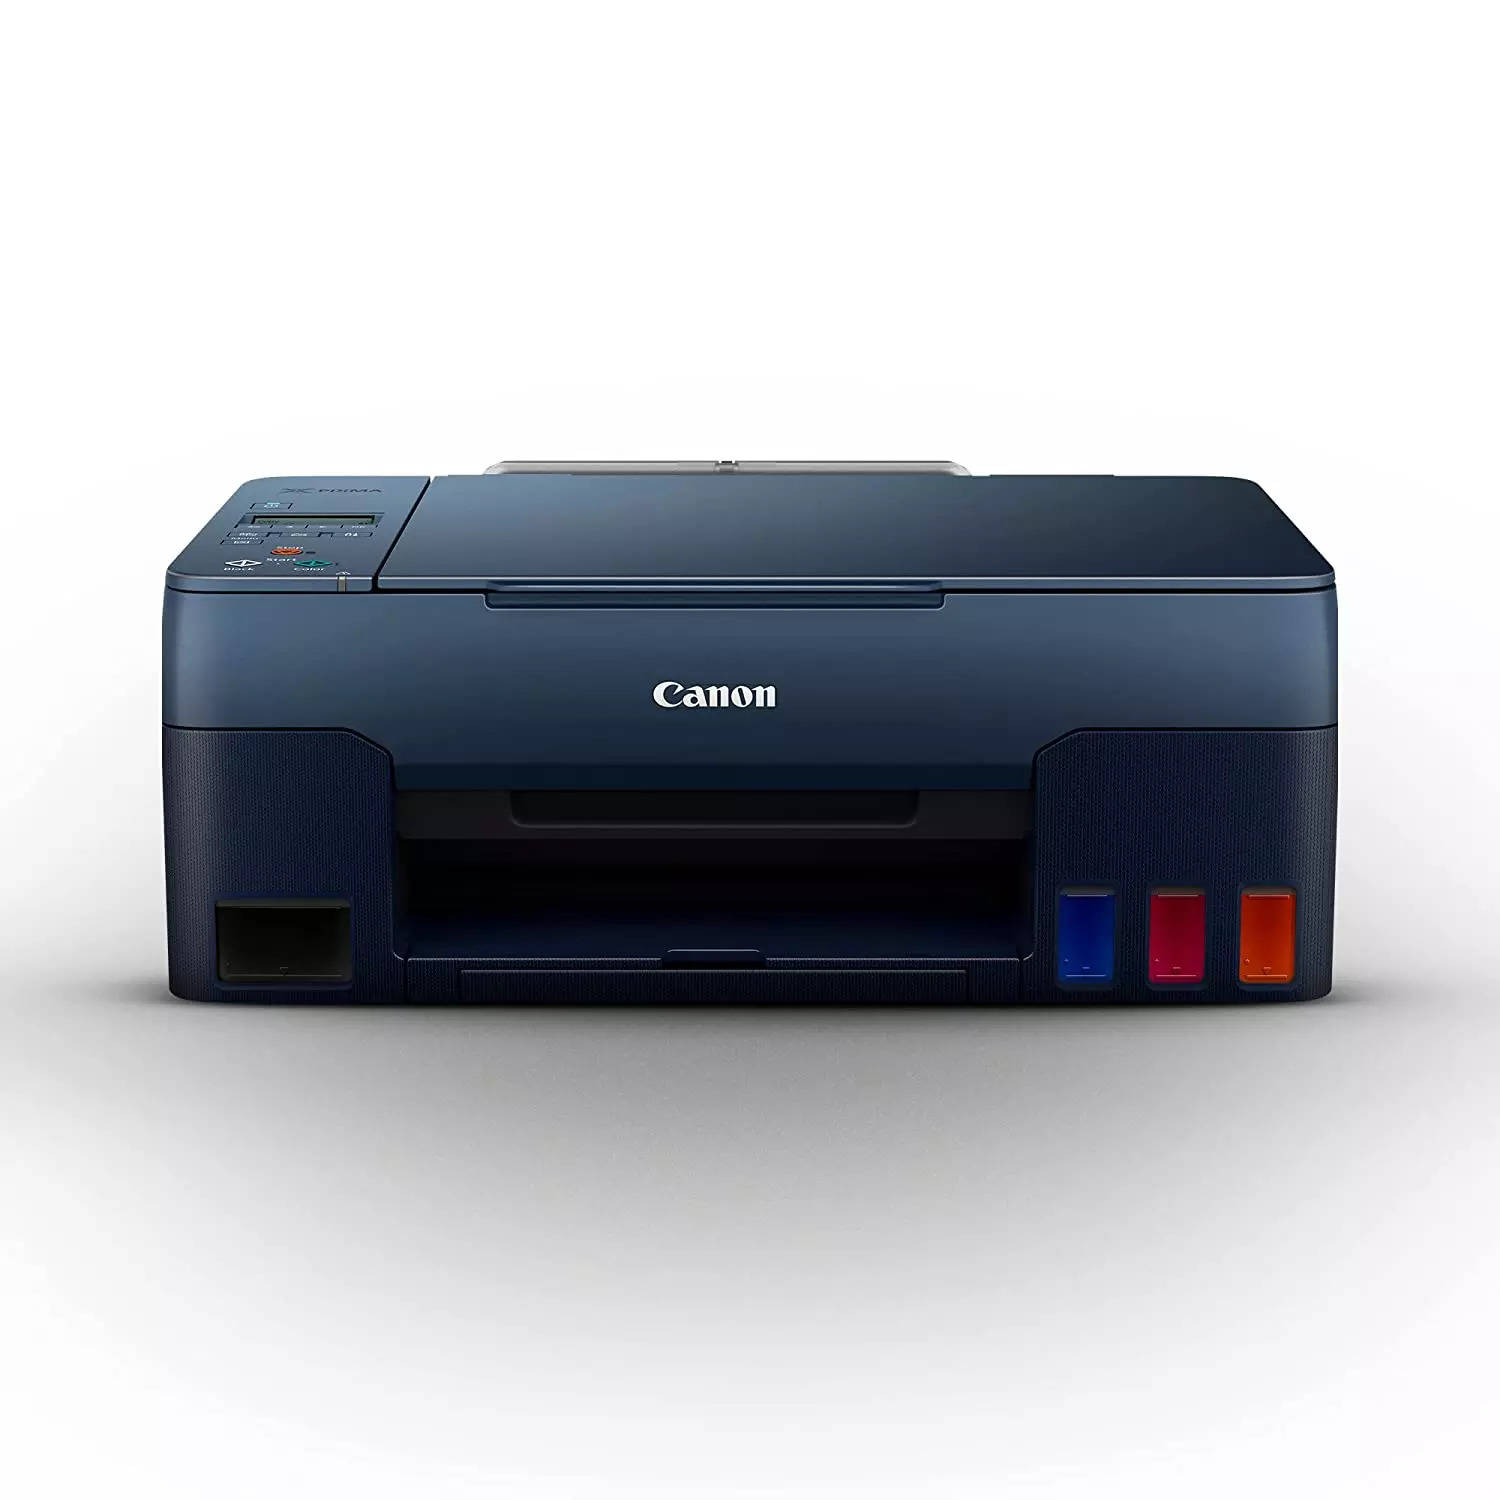 Best Printers for Homes and Offices: 8 Best Printers for Homes and Offices  in India: Take Your Pick - The Economic Times